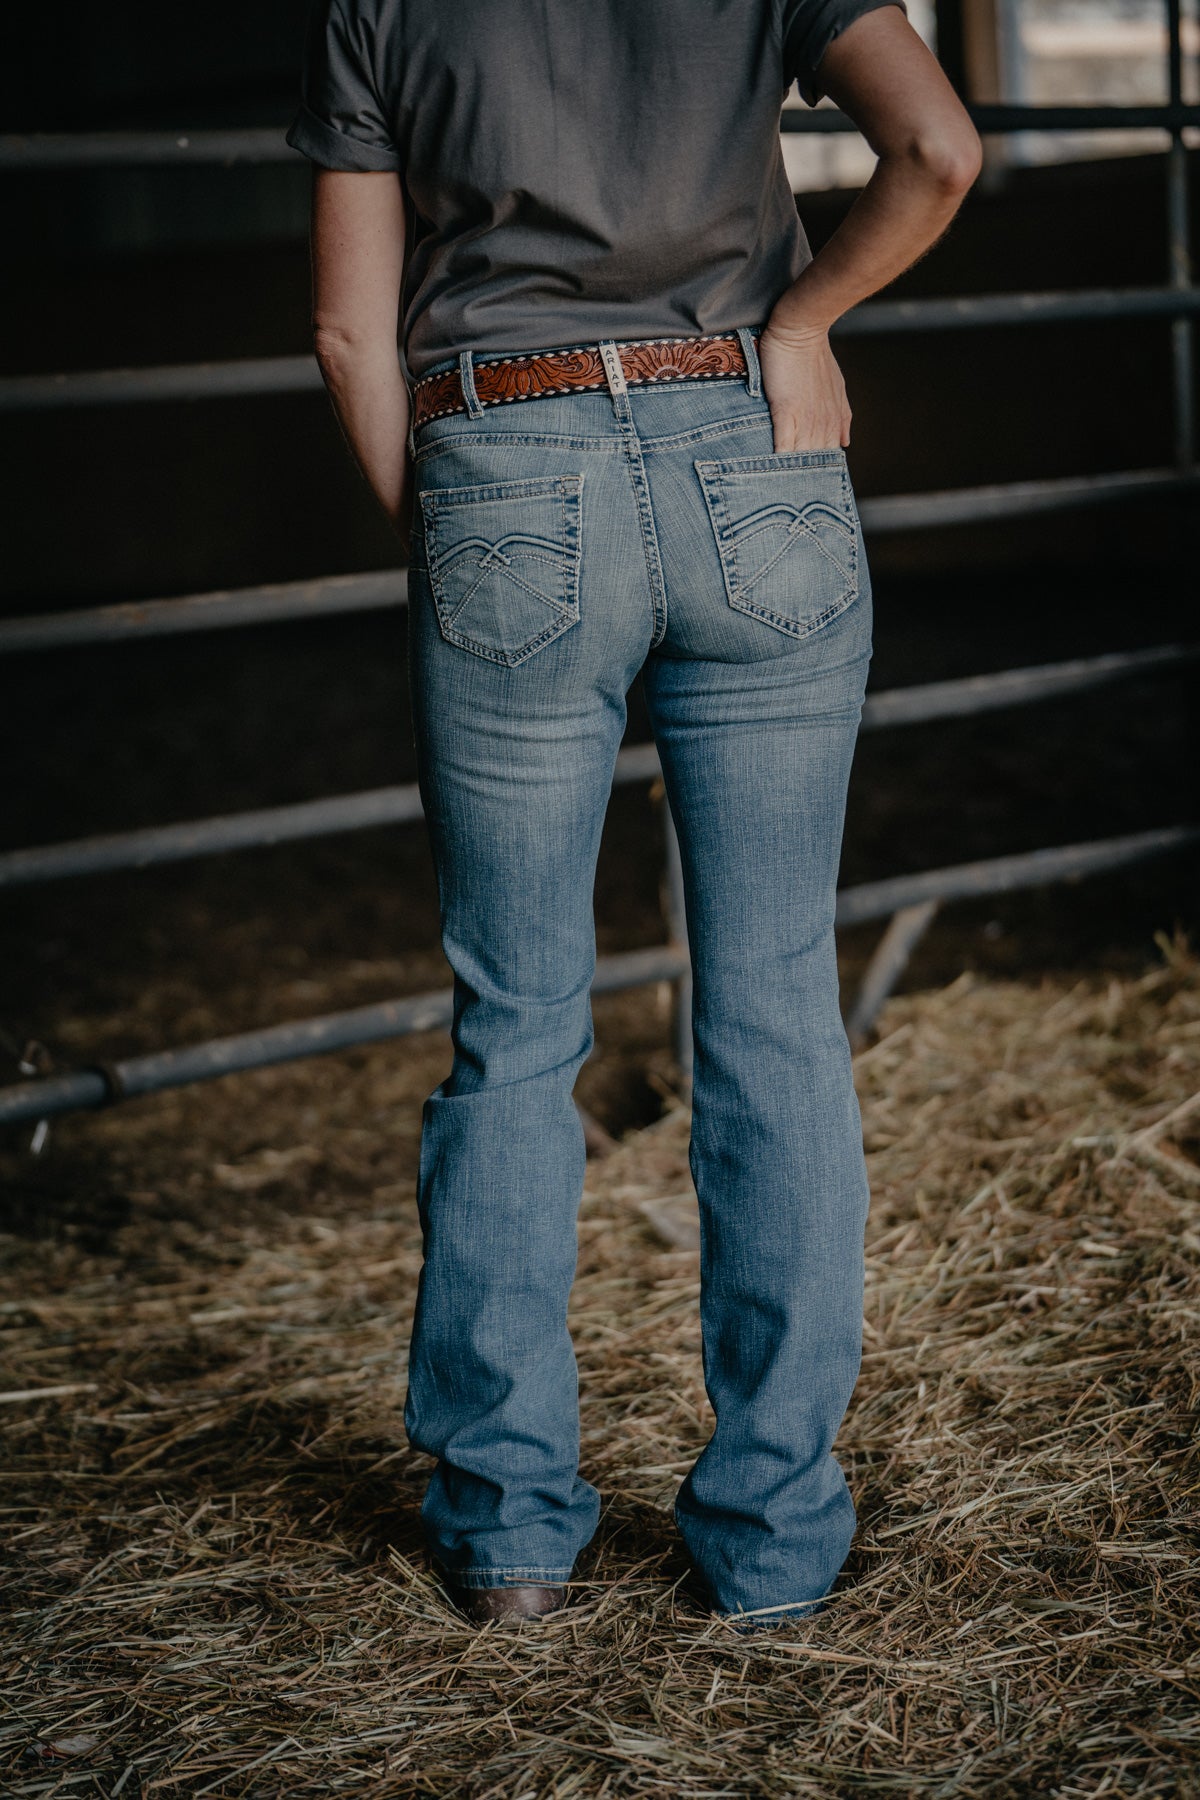 Jayla' Perfect Rise Bootcut Jean by Ariat